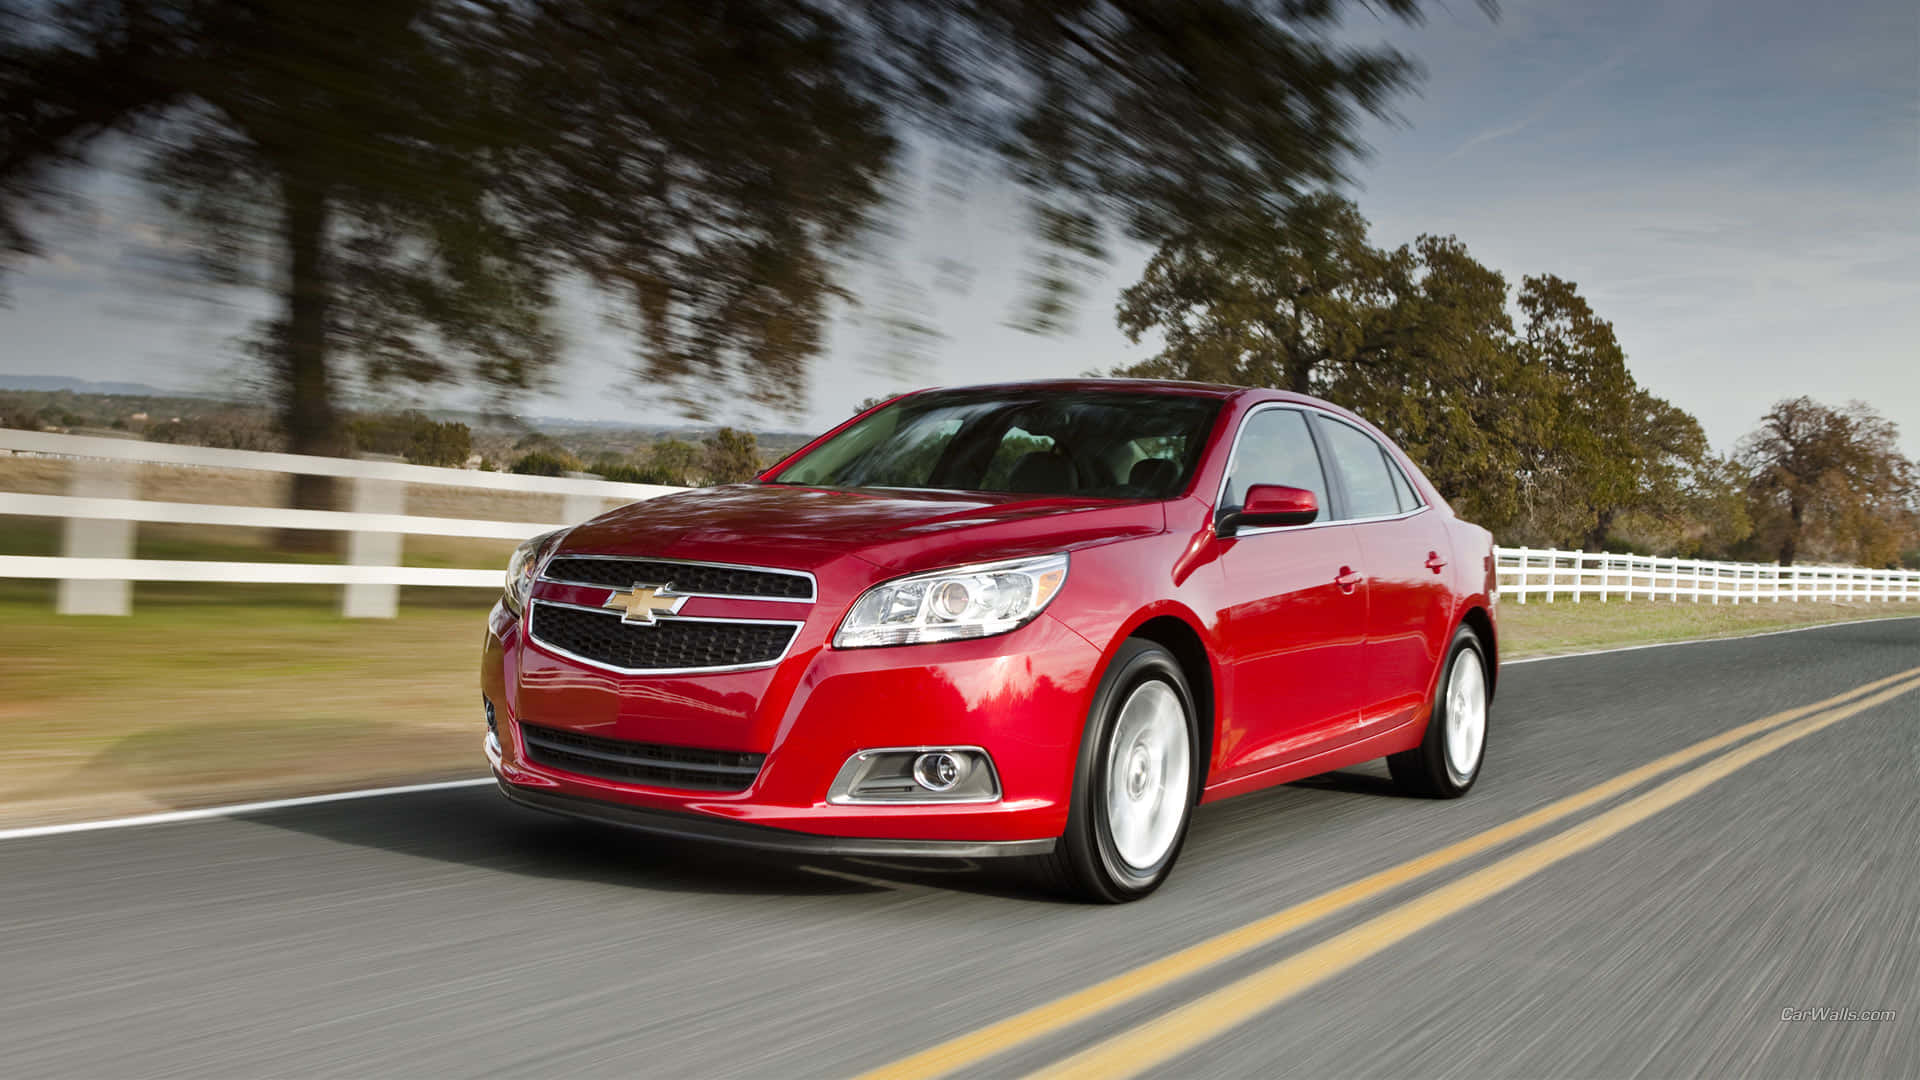 Cruise in Style with a Chevy Malibu Wallpaper